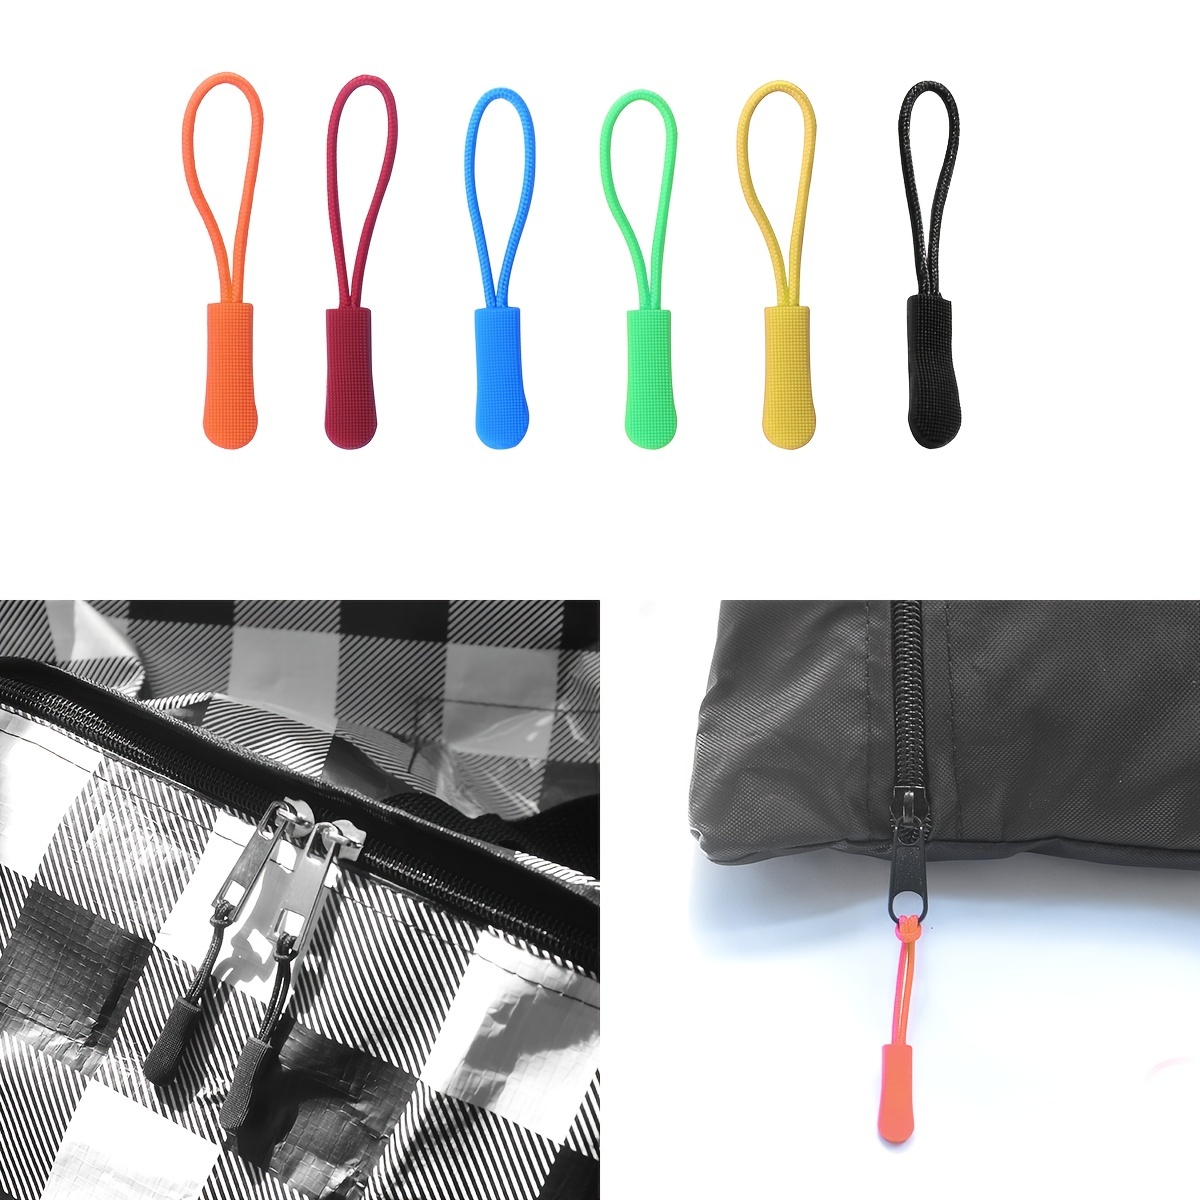 60 Pcs Heavy Duty U Shape Nylon Zipper Pulls Zipper Tags Zipper Extension  Replacement For Cord, Backpacks, Jackets, Traveling Cases, Luggage, Purses